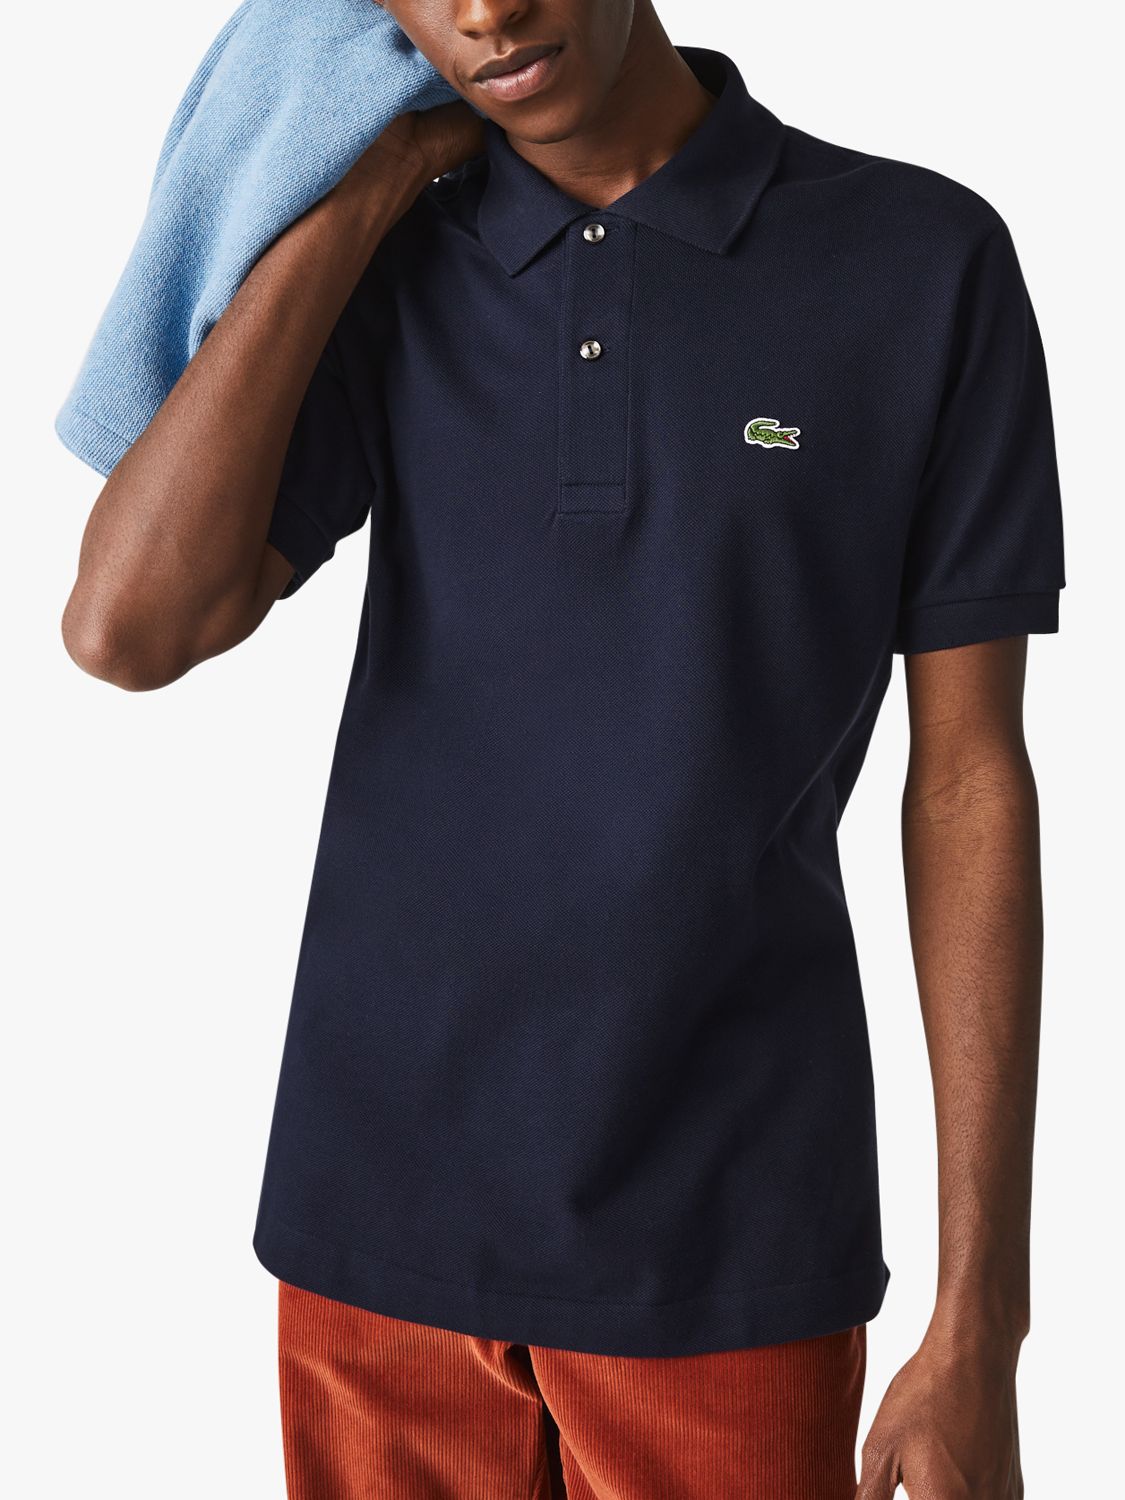 Lacoste L.12.12 Classic Regular Fit Short Sleeve Polo Shirt, Navy, S